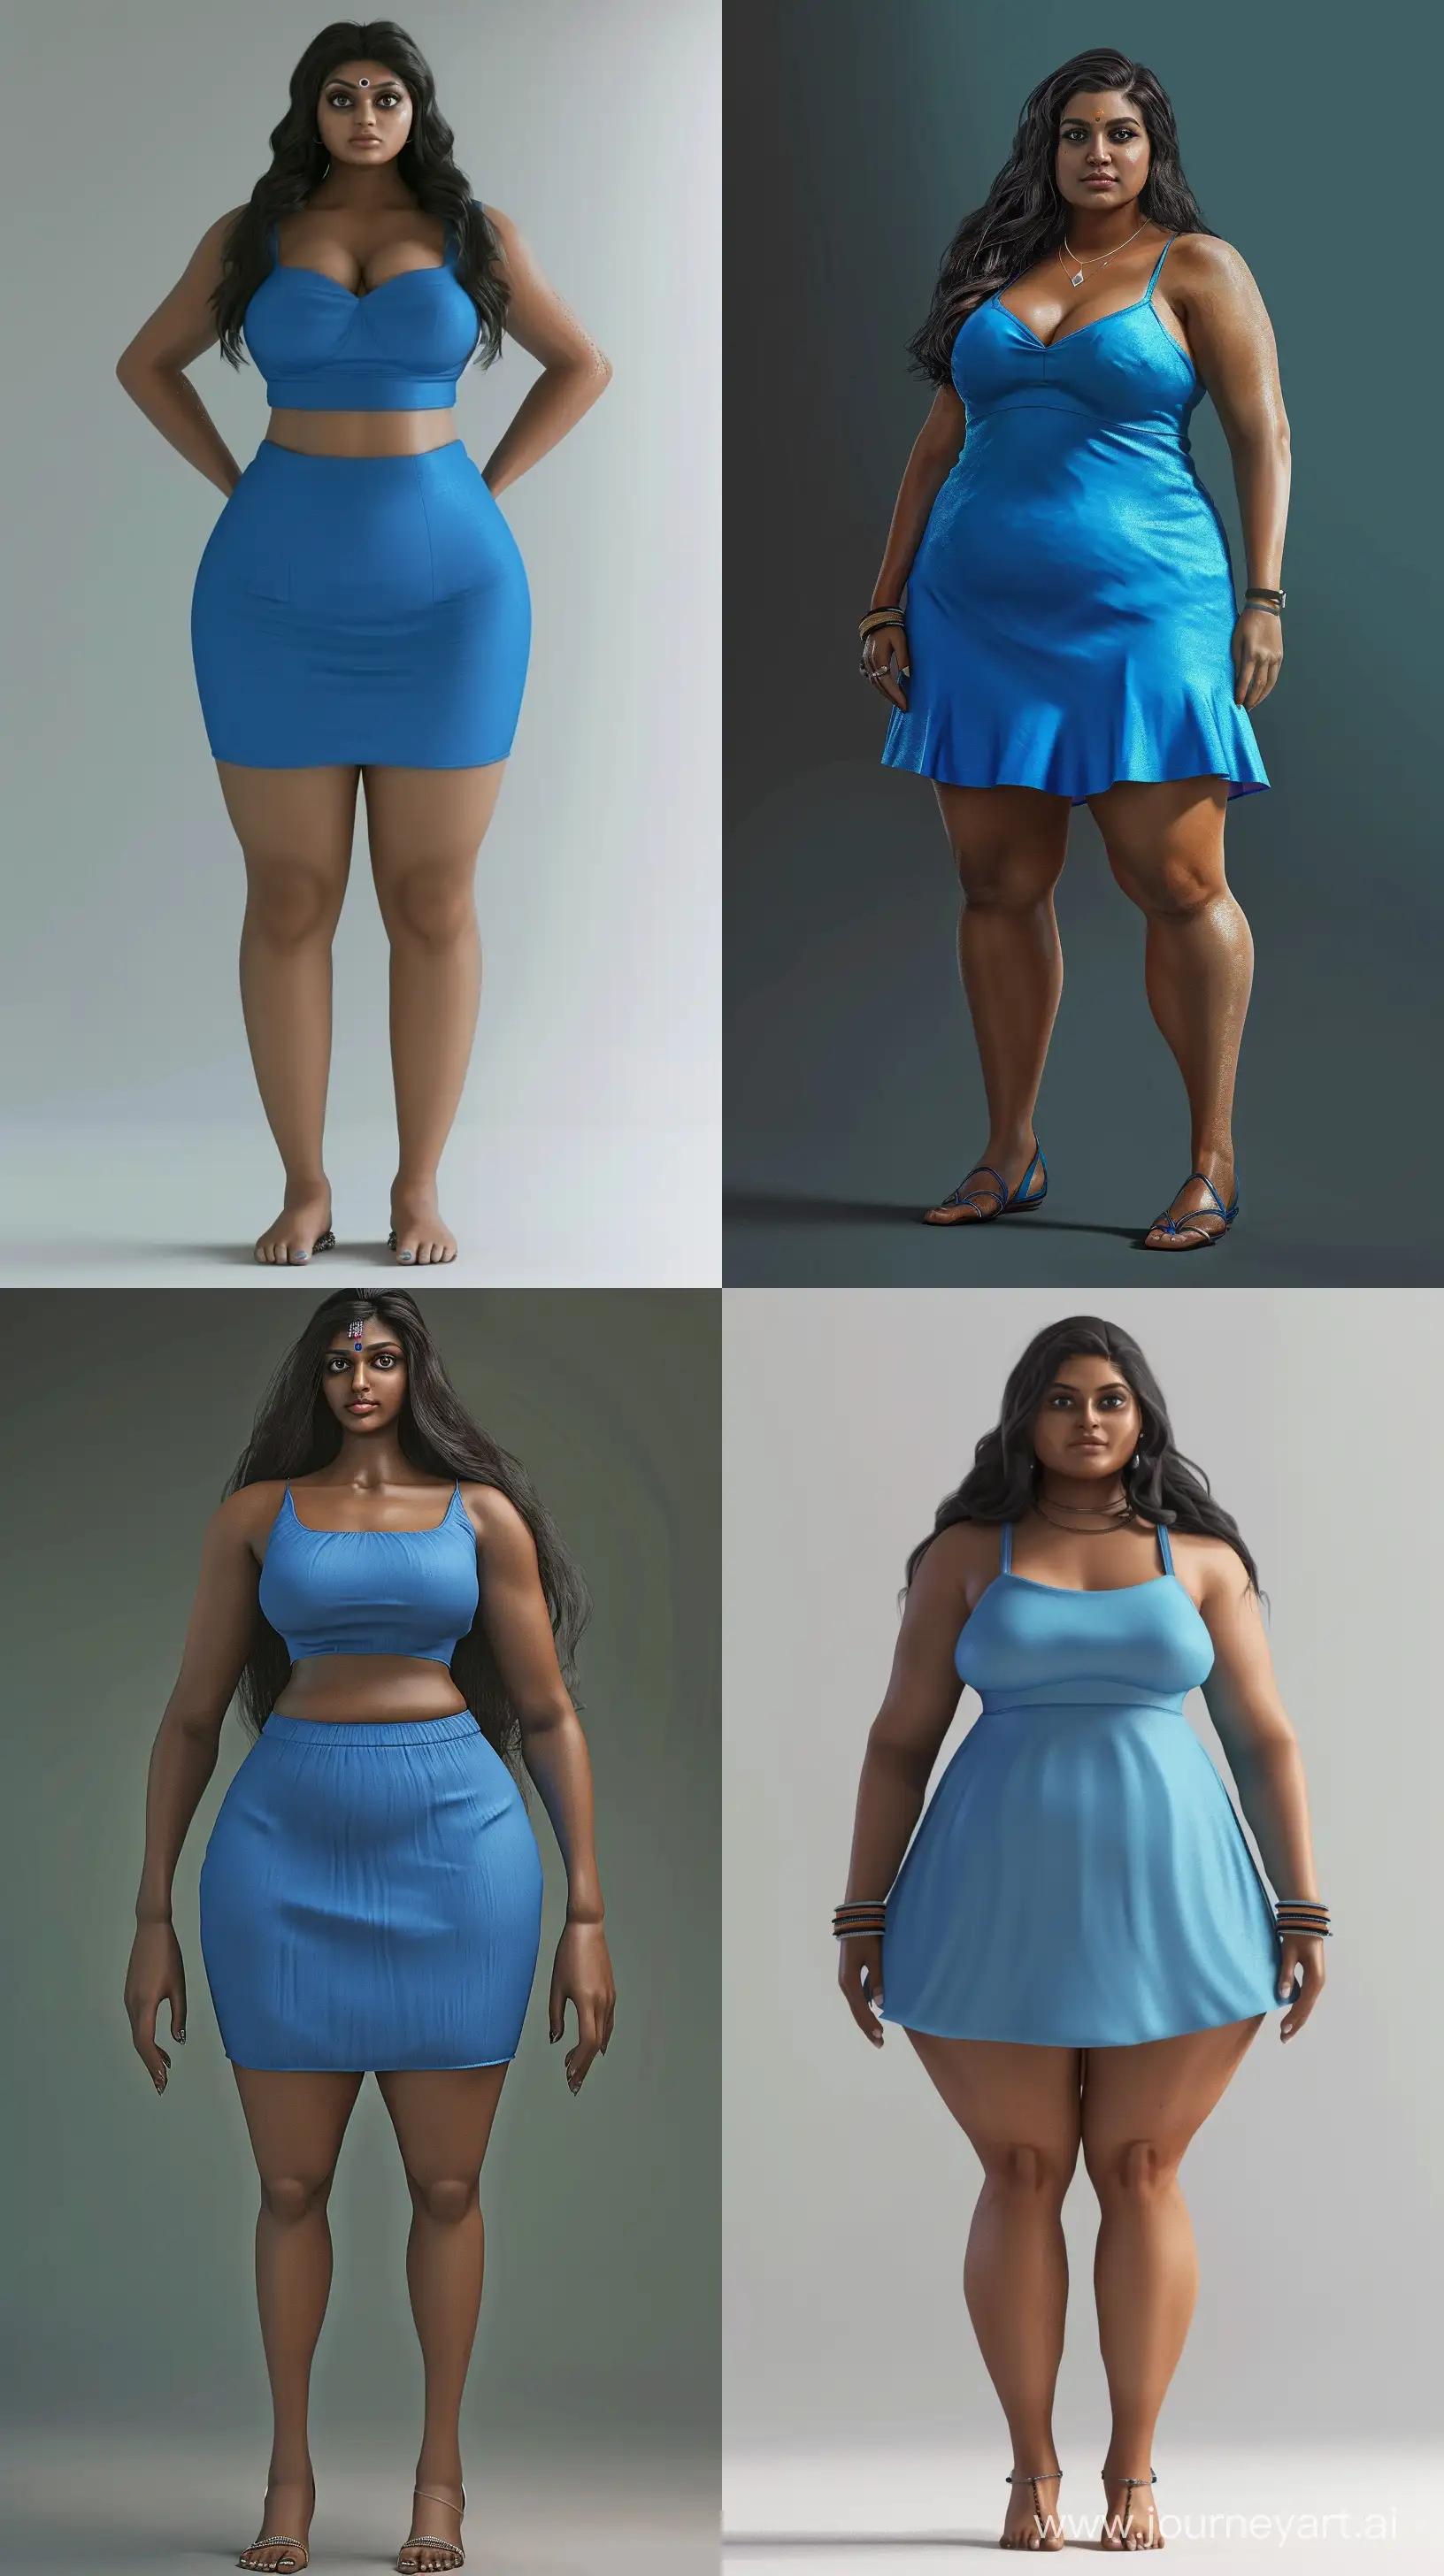 A realistic color photo of a very tall thick curvy Tamil Indian woman wearing a blue dress. tall curvy thick body. wide hips. Face like a Tamil Salma Hayek. rectangular face. dark brown skin. long legs. small feet. --ar 9:16

